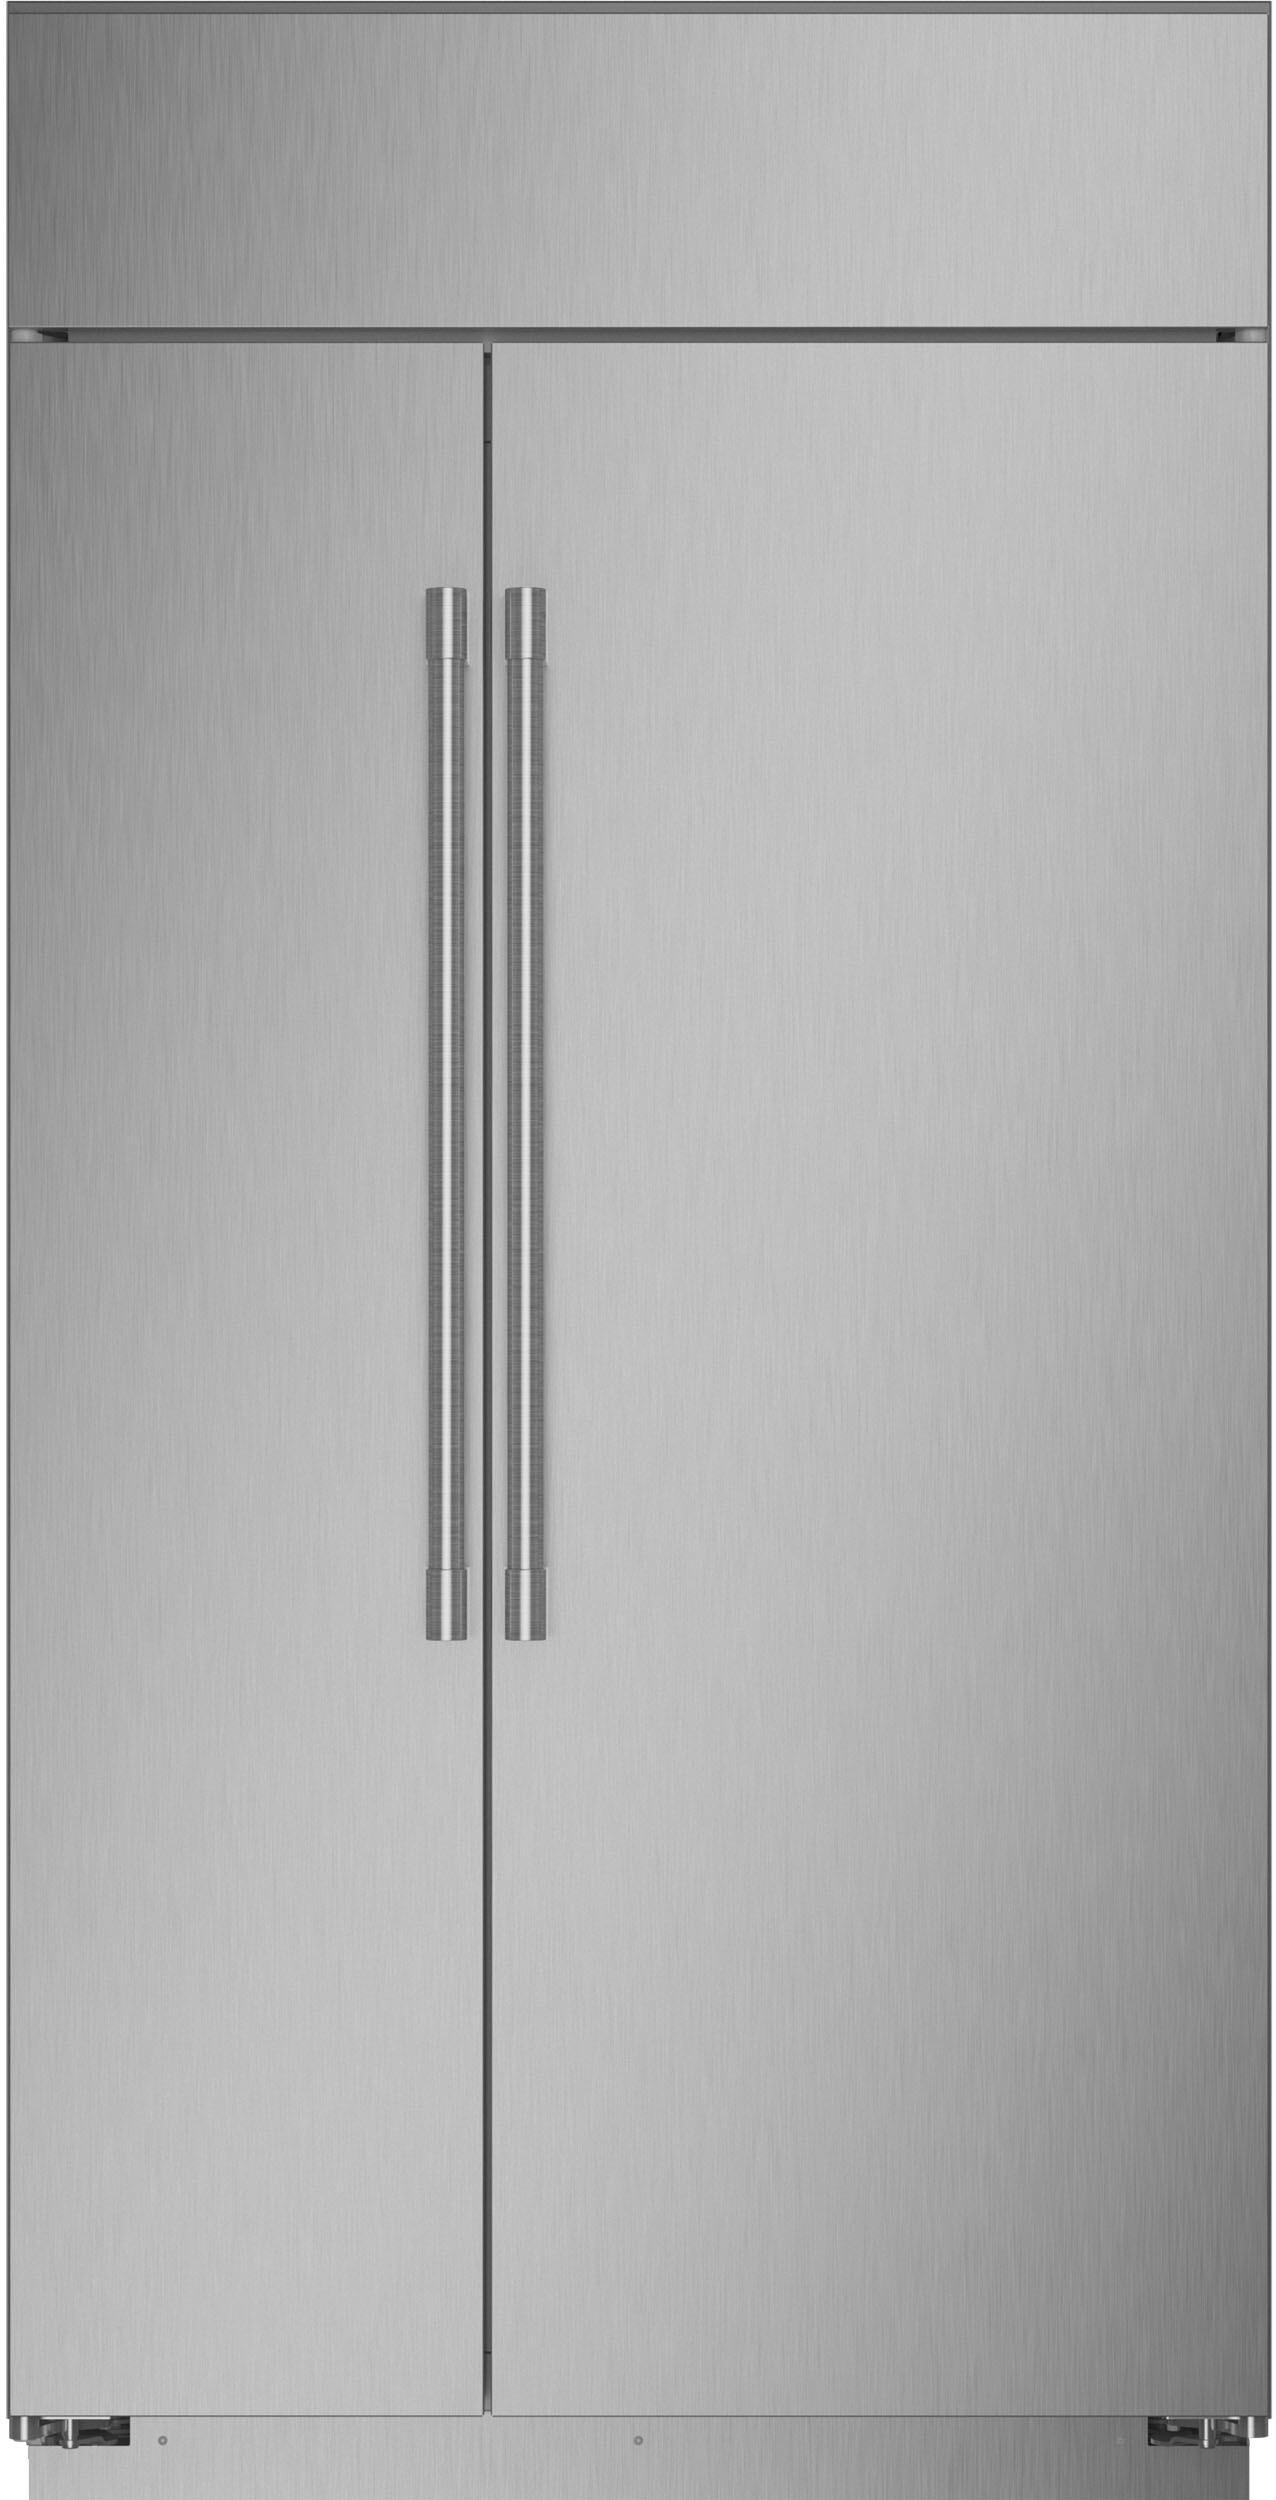 Monogram 42 Inch 42 Built In Counter Depth Side-by-Side Refrigerator ZISS420NNSS